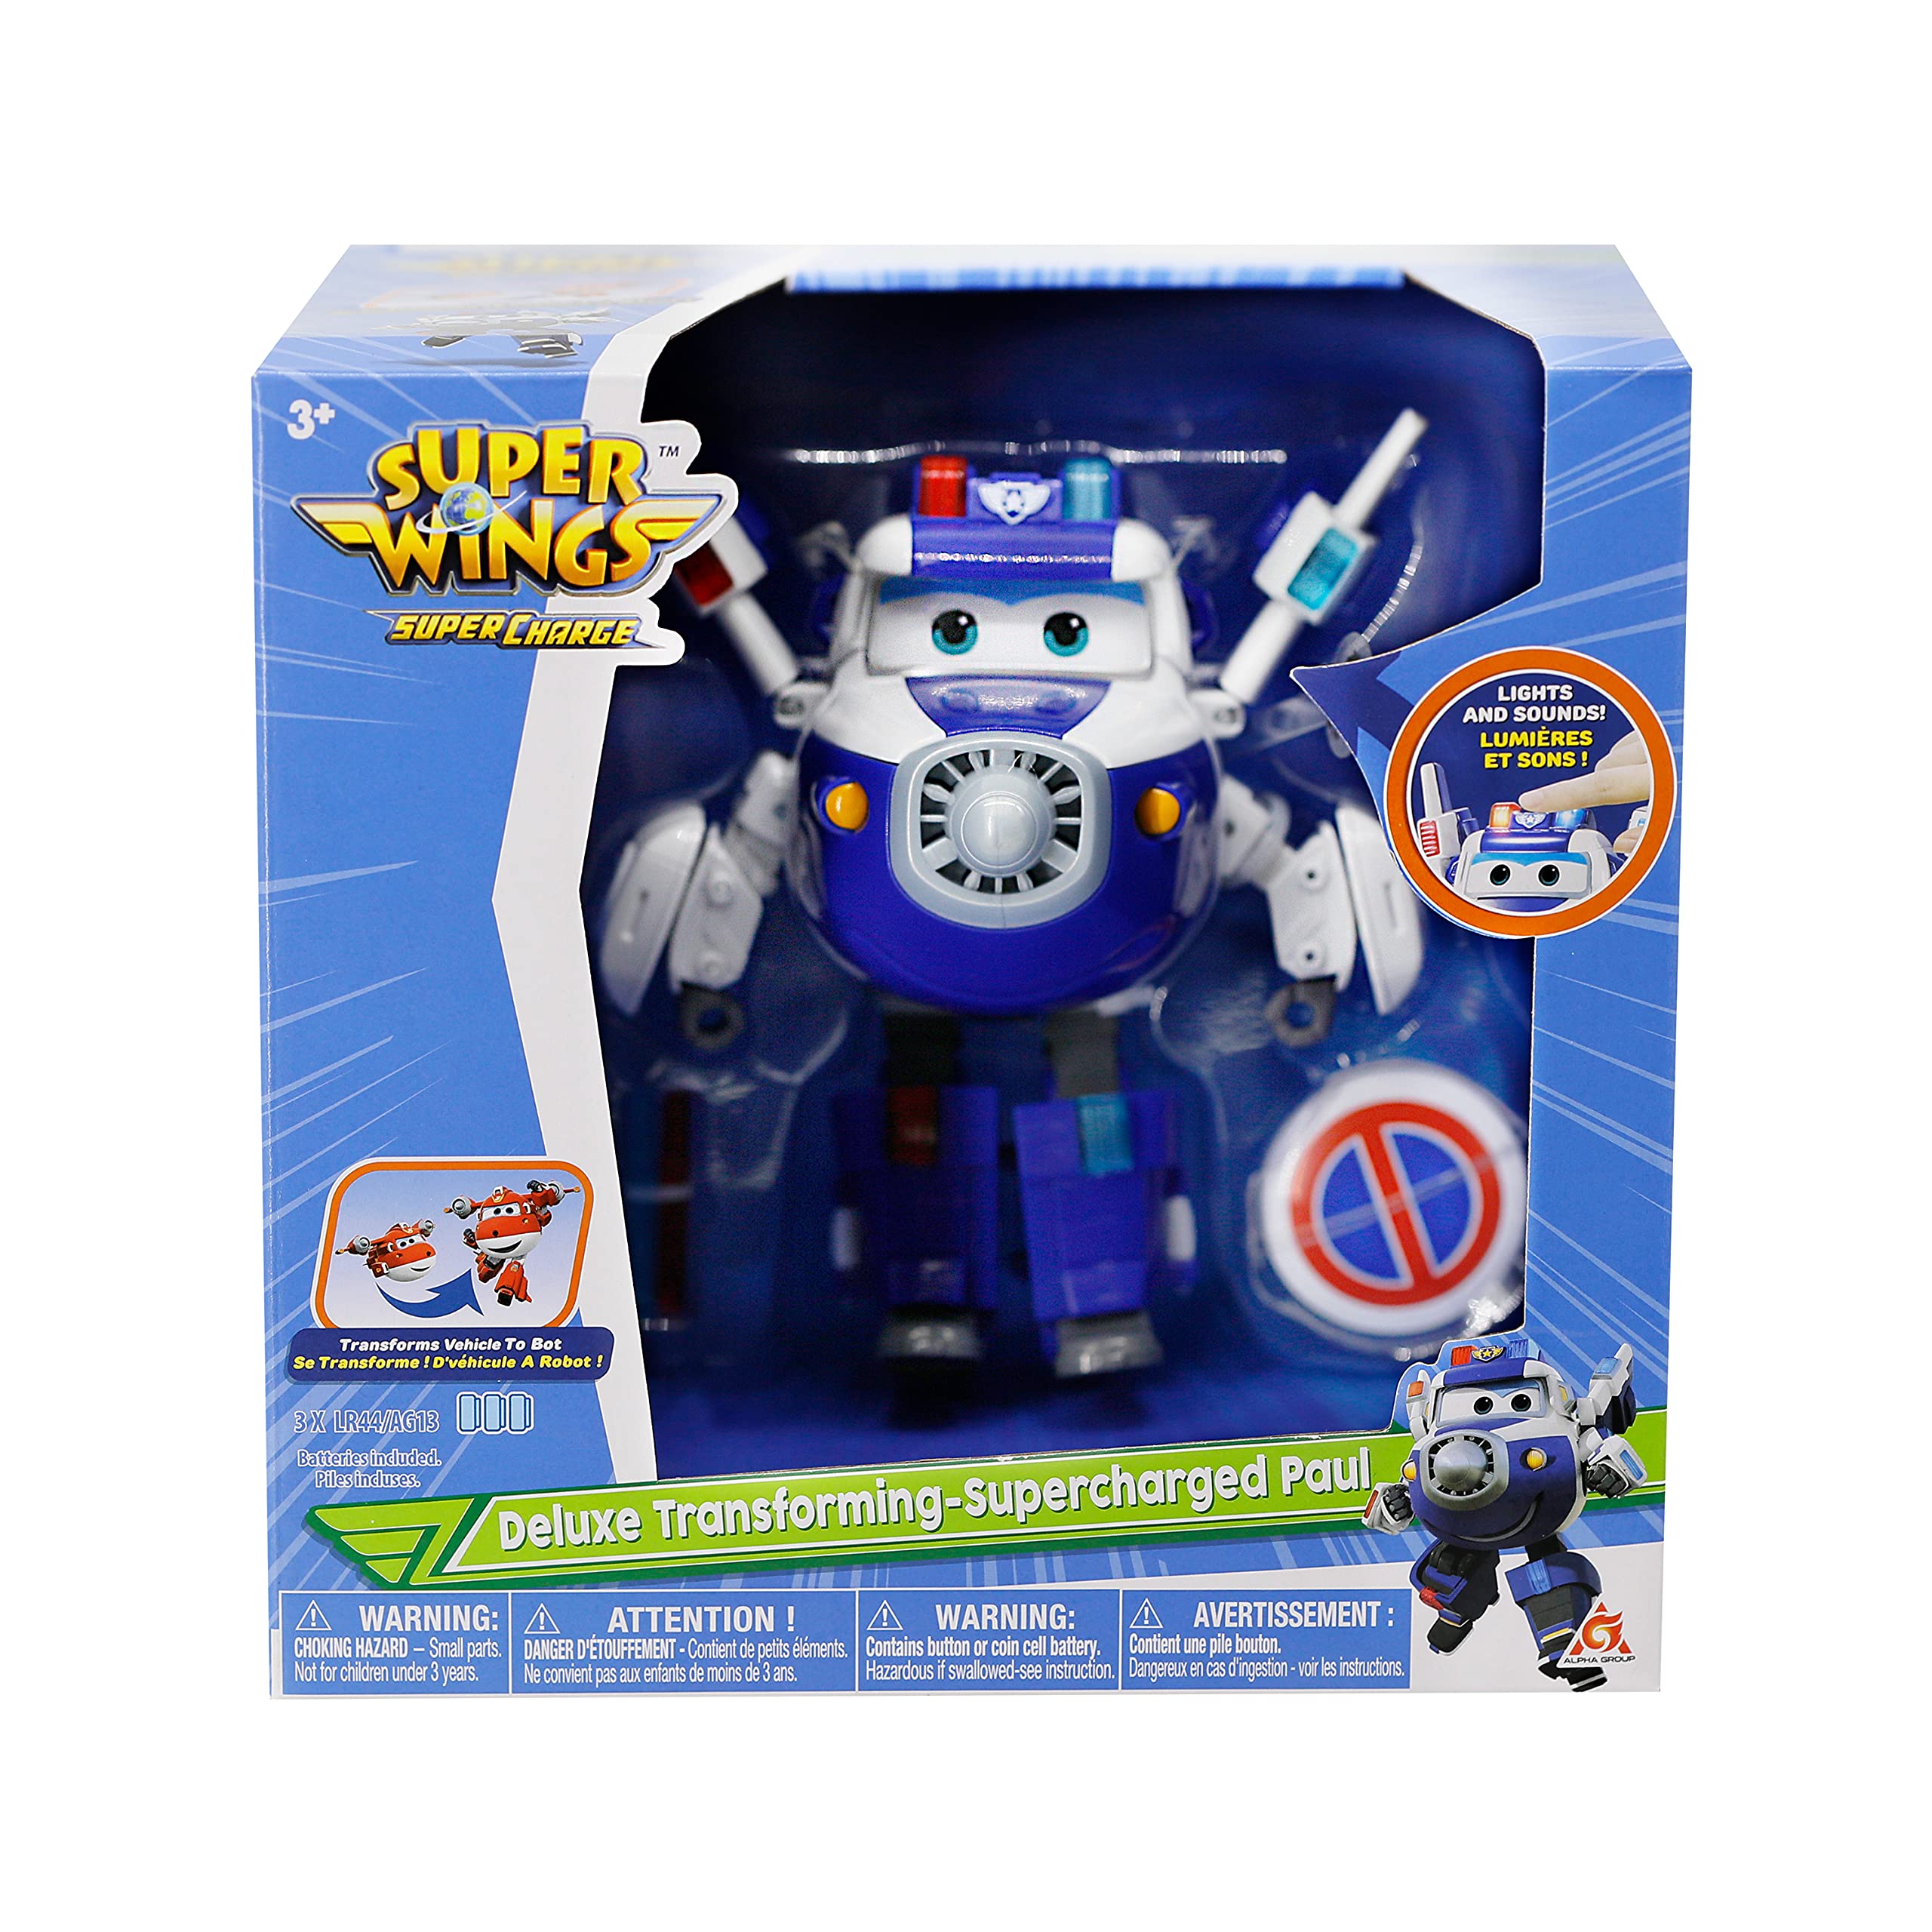 Super Wings - 6'' Deluxe Transforming Supercharged Paul Airplane Toys Action Figure | Plane to Robot | Toy Plane Vehicle Gift for Preschool Kids 3 4 5 Year Old Boys Girls | Light and Sound Effects